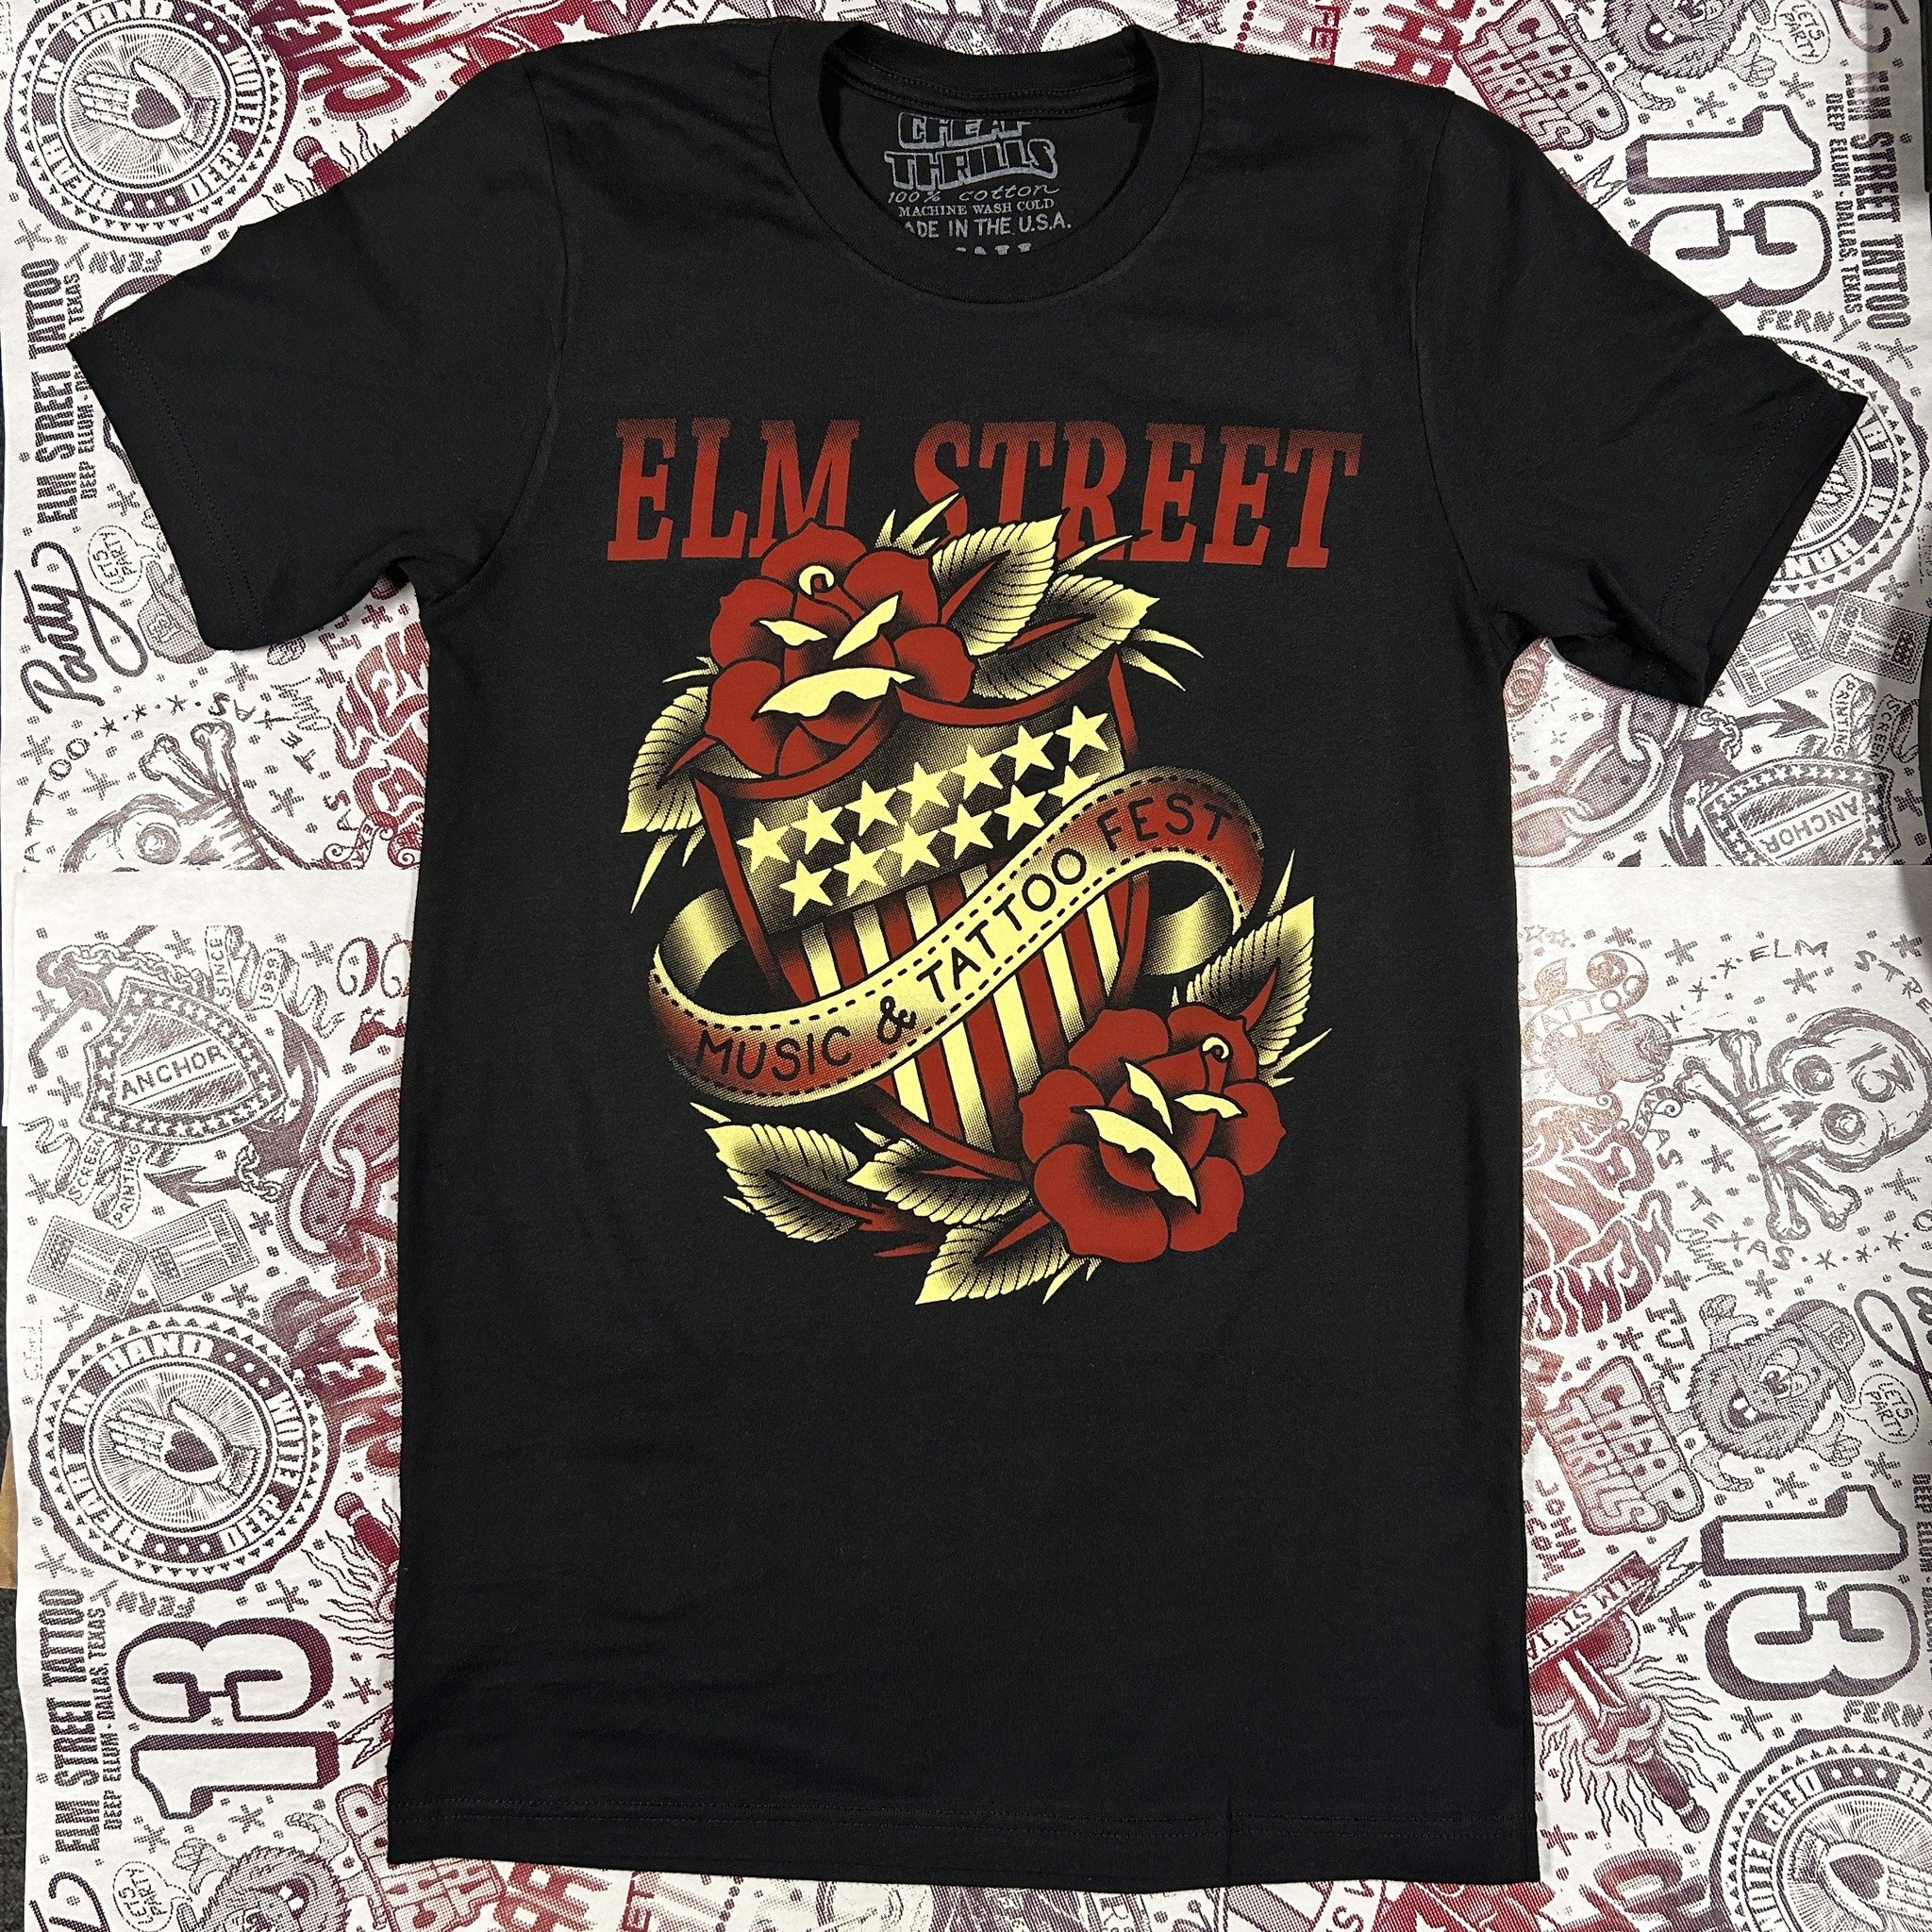 @elmstfest Tees Available NOW for pre-sale!
🔸Sizes: XS - 4XL
🔸Limited quantities available!
🔸FREE SHIPPING IN US (Orders of $35 or more)
🔸Only available online at Anchor Screen Printing(.com)

 #oliverpeck #elmstreettattoo #anchorscreenprinting #